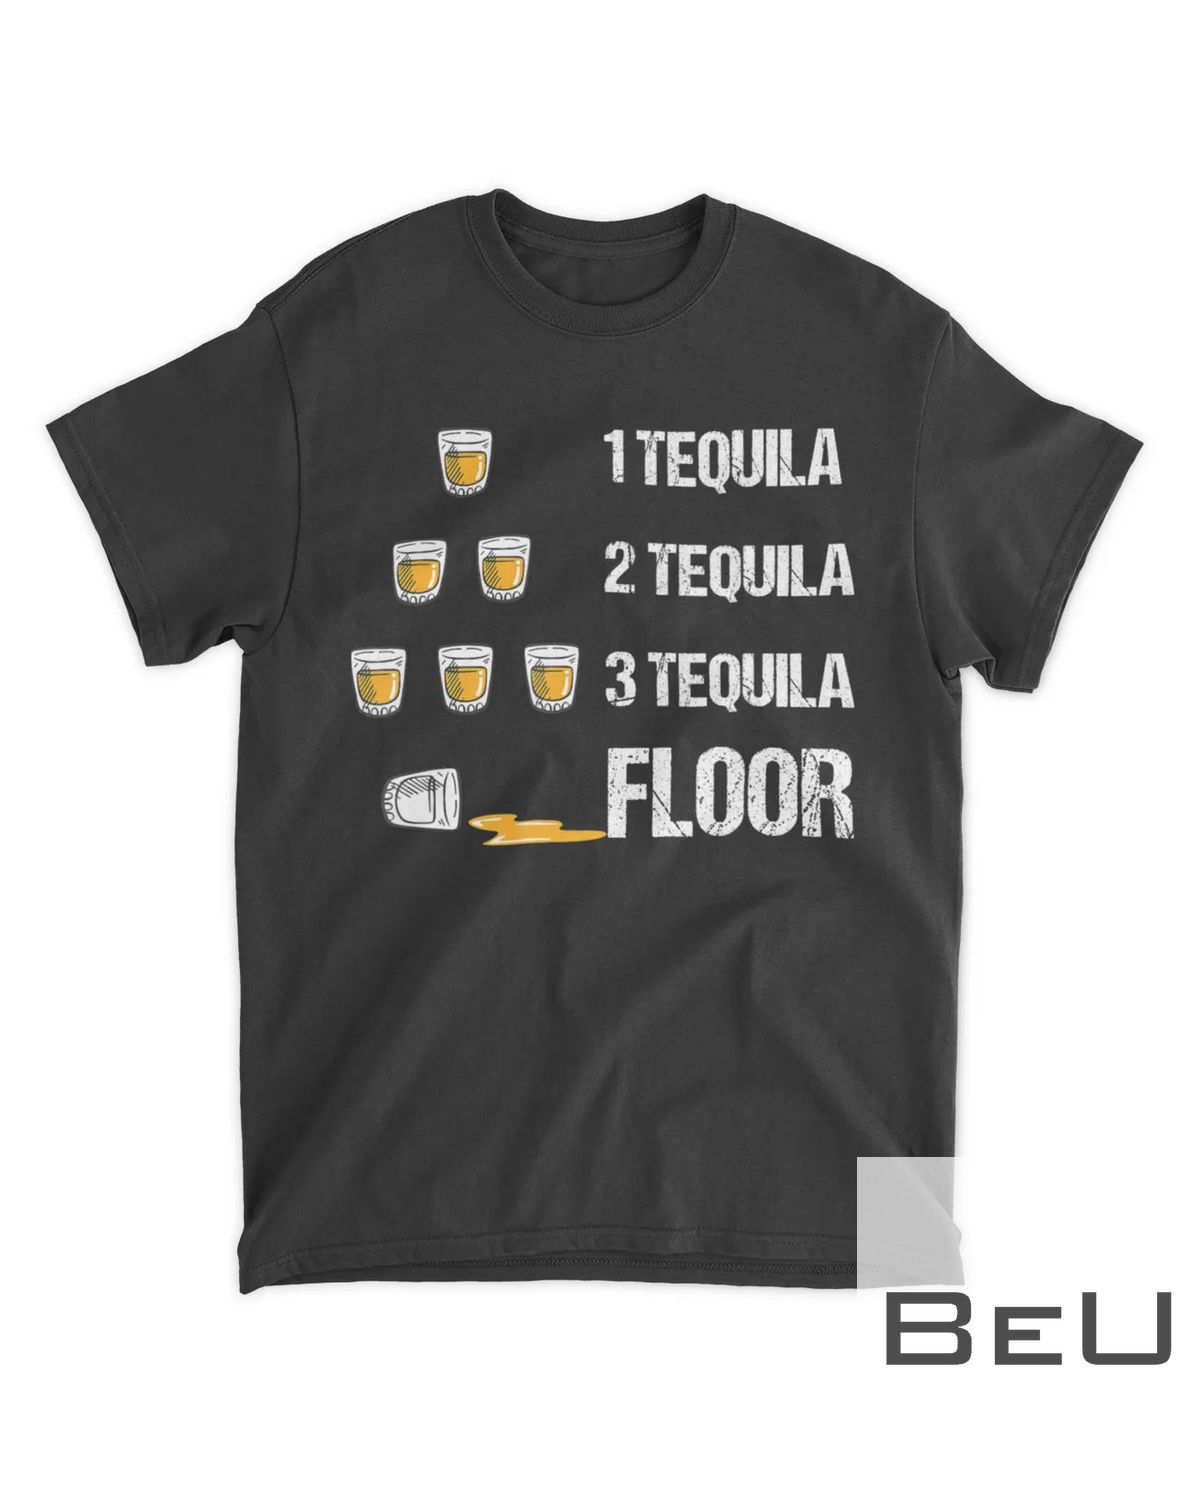 1 Tequila 2 Tequila 3 Tequila Floor Funny Drinking T-Shirt, Tank Top, Long Sleeve